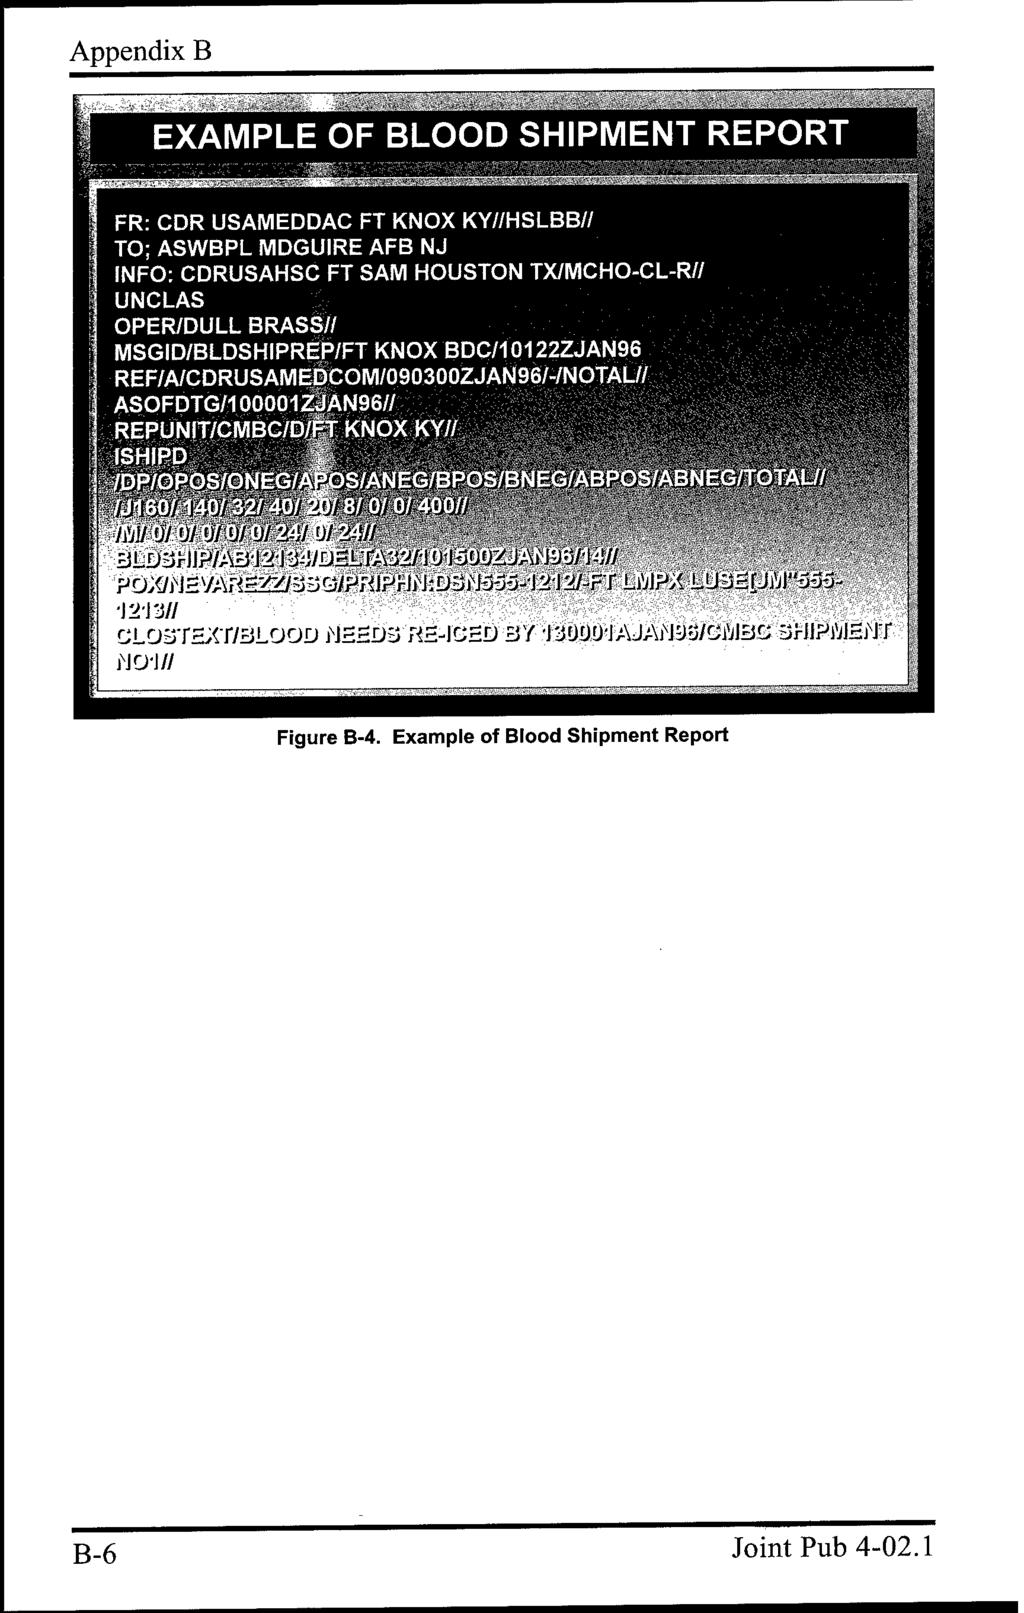 Appendix B EXAMPLE OF BLOOD SHIPMENT REPORT FR: CDR USAMEDDAC FT KNOX KY//HSLBB// TO; ASWBPL MDGUIRE AFB NJ INFO: CDRUSAHSC FT SAM HOUSTON TX/MCHO-CL-R// UNCLAS OPER/DULL BRASS7/ MSGID/BLDSHIPREP/FT